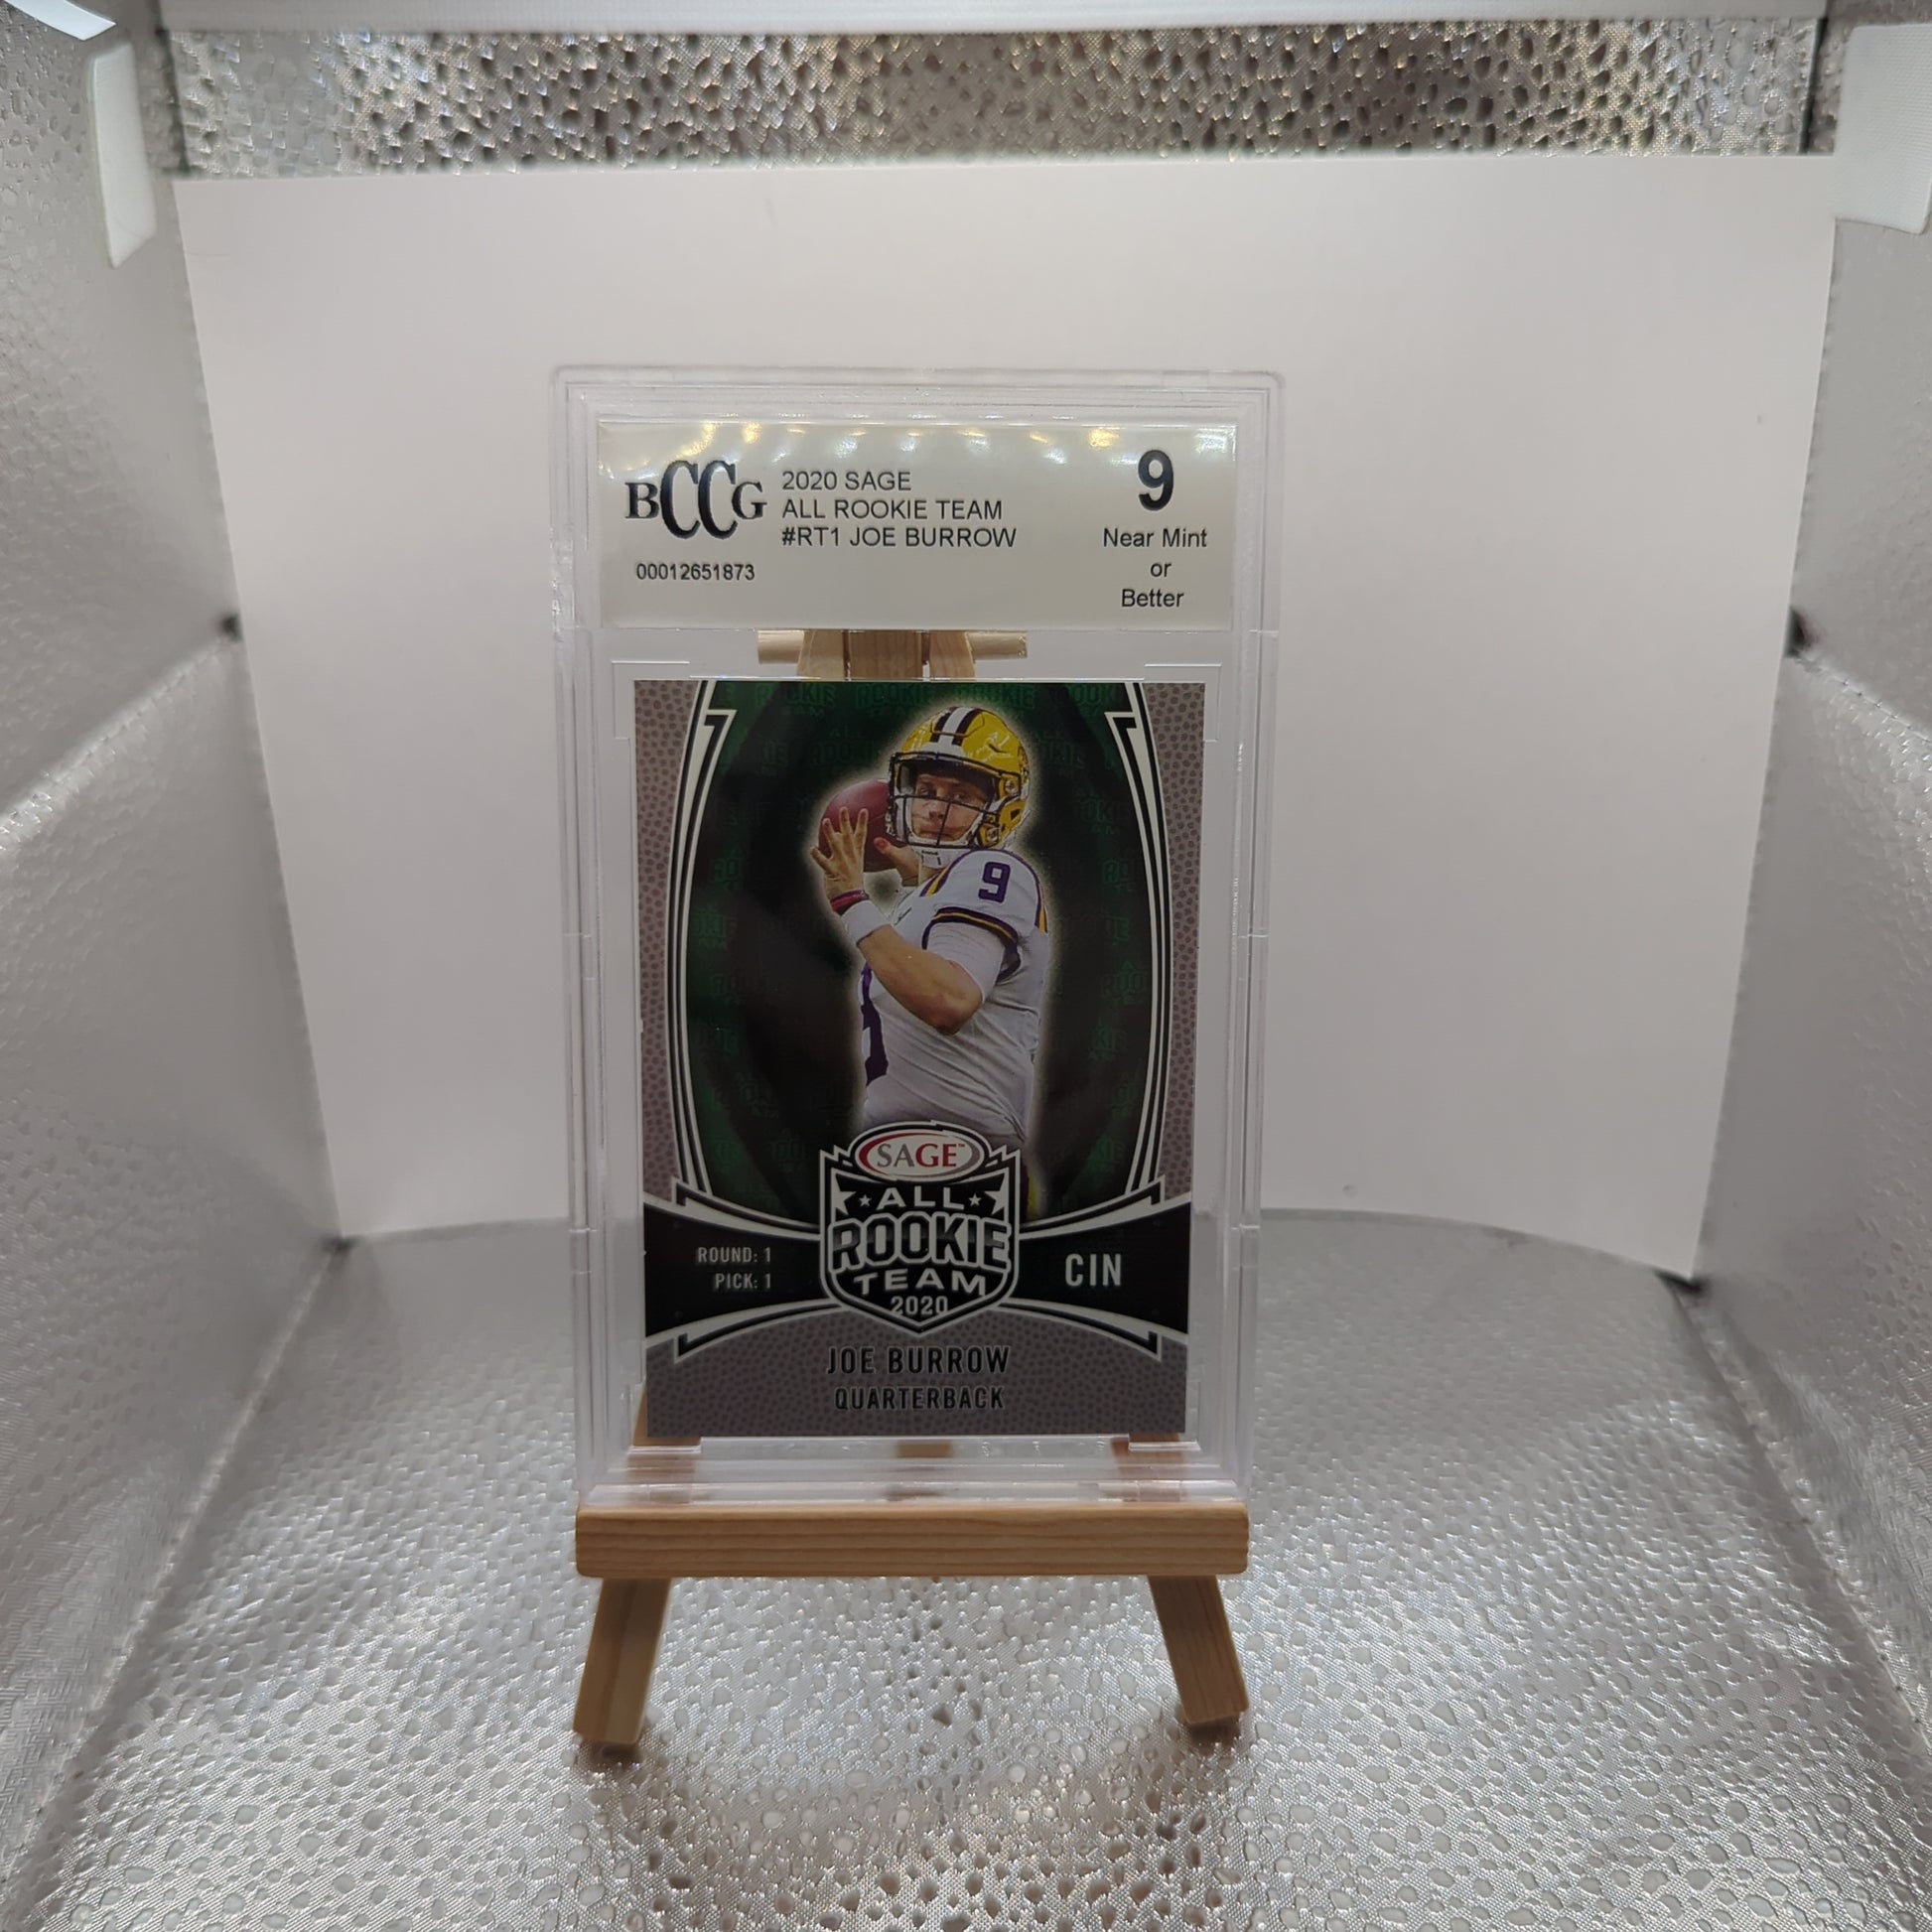 Joe Burrow 2020 Sage All Rookie Team Gold RT1 RC LSU College Card Graded BCCG 9 FRENLY BRICKS - Open 7 Days